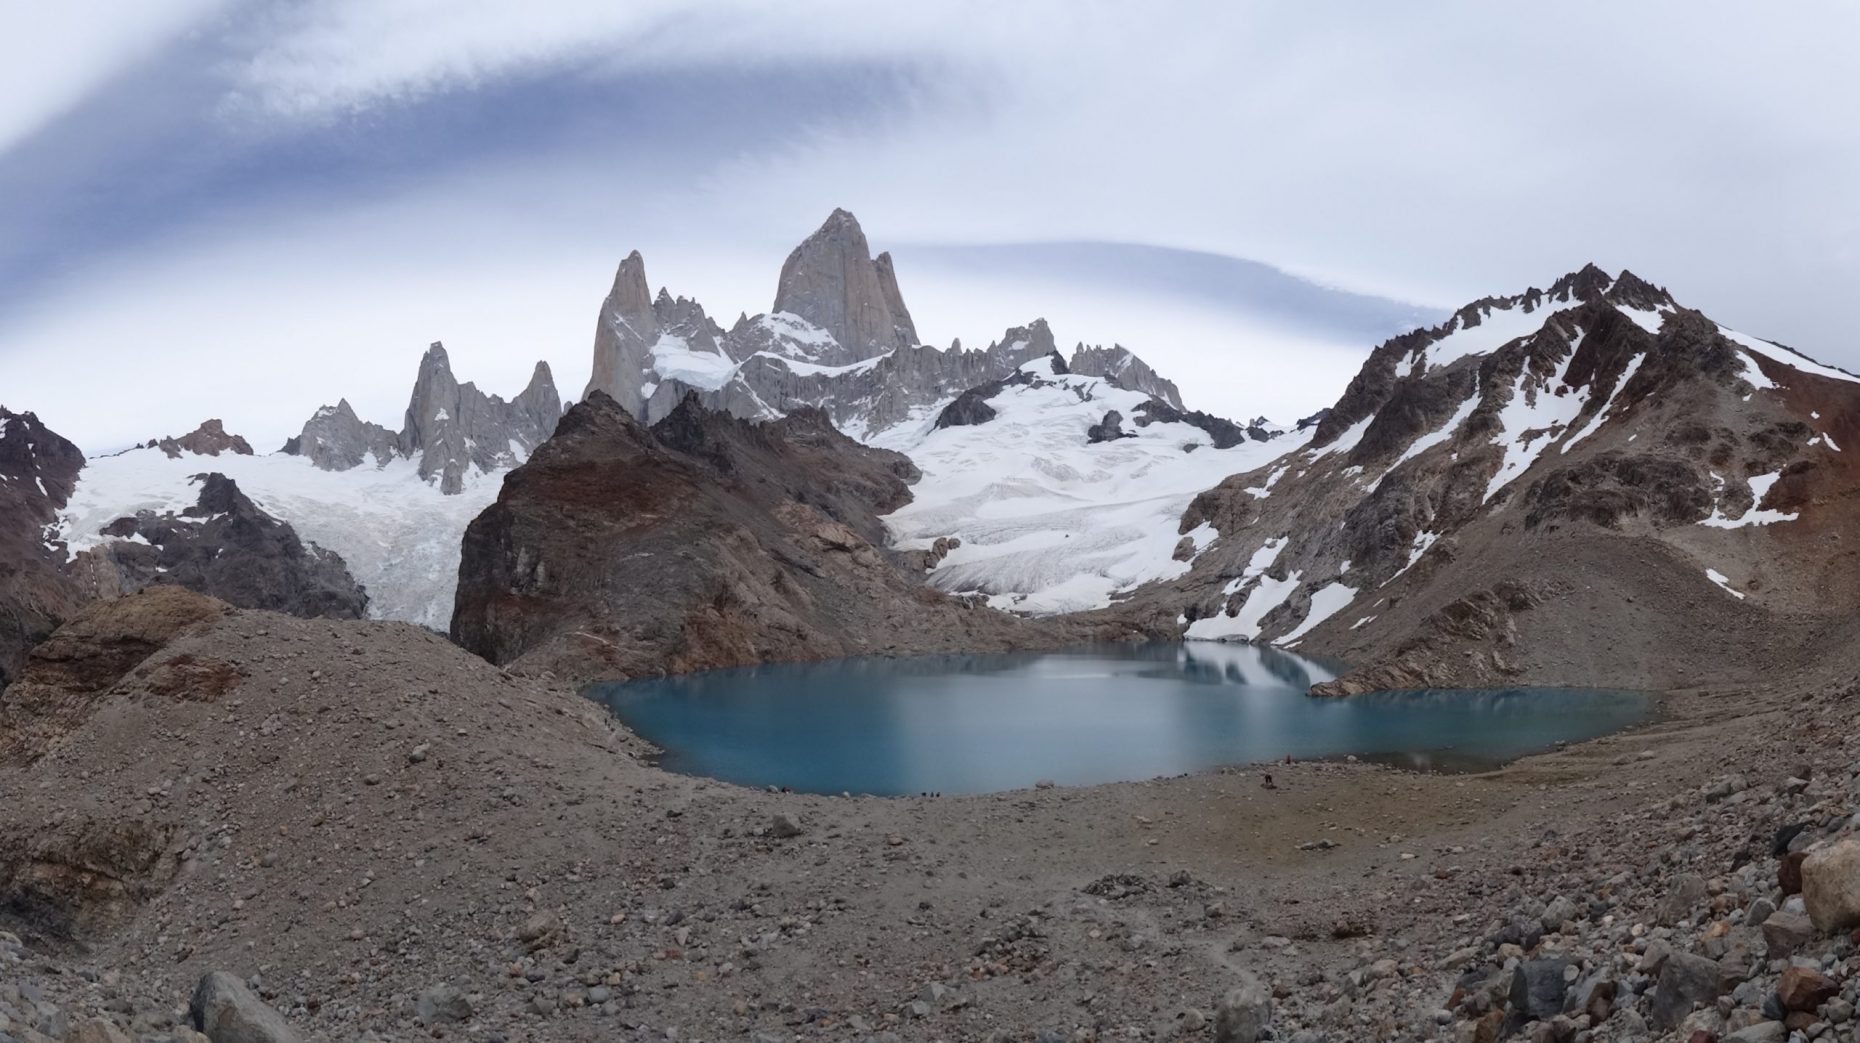 Chapter 25:  Flat Tires and Mt. Fitz Roy